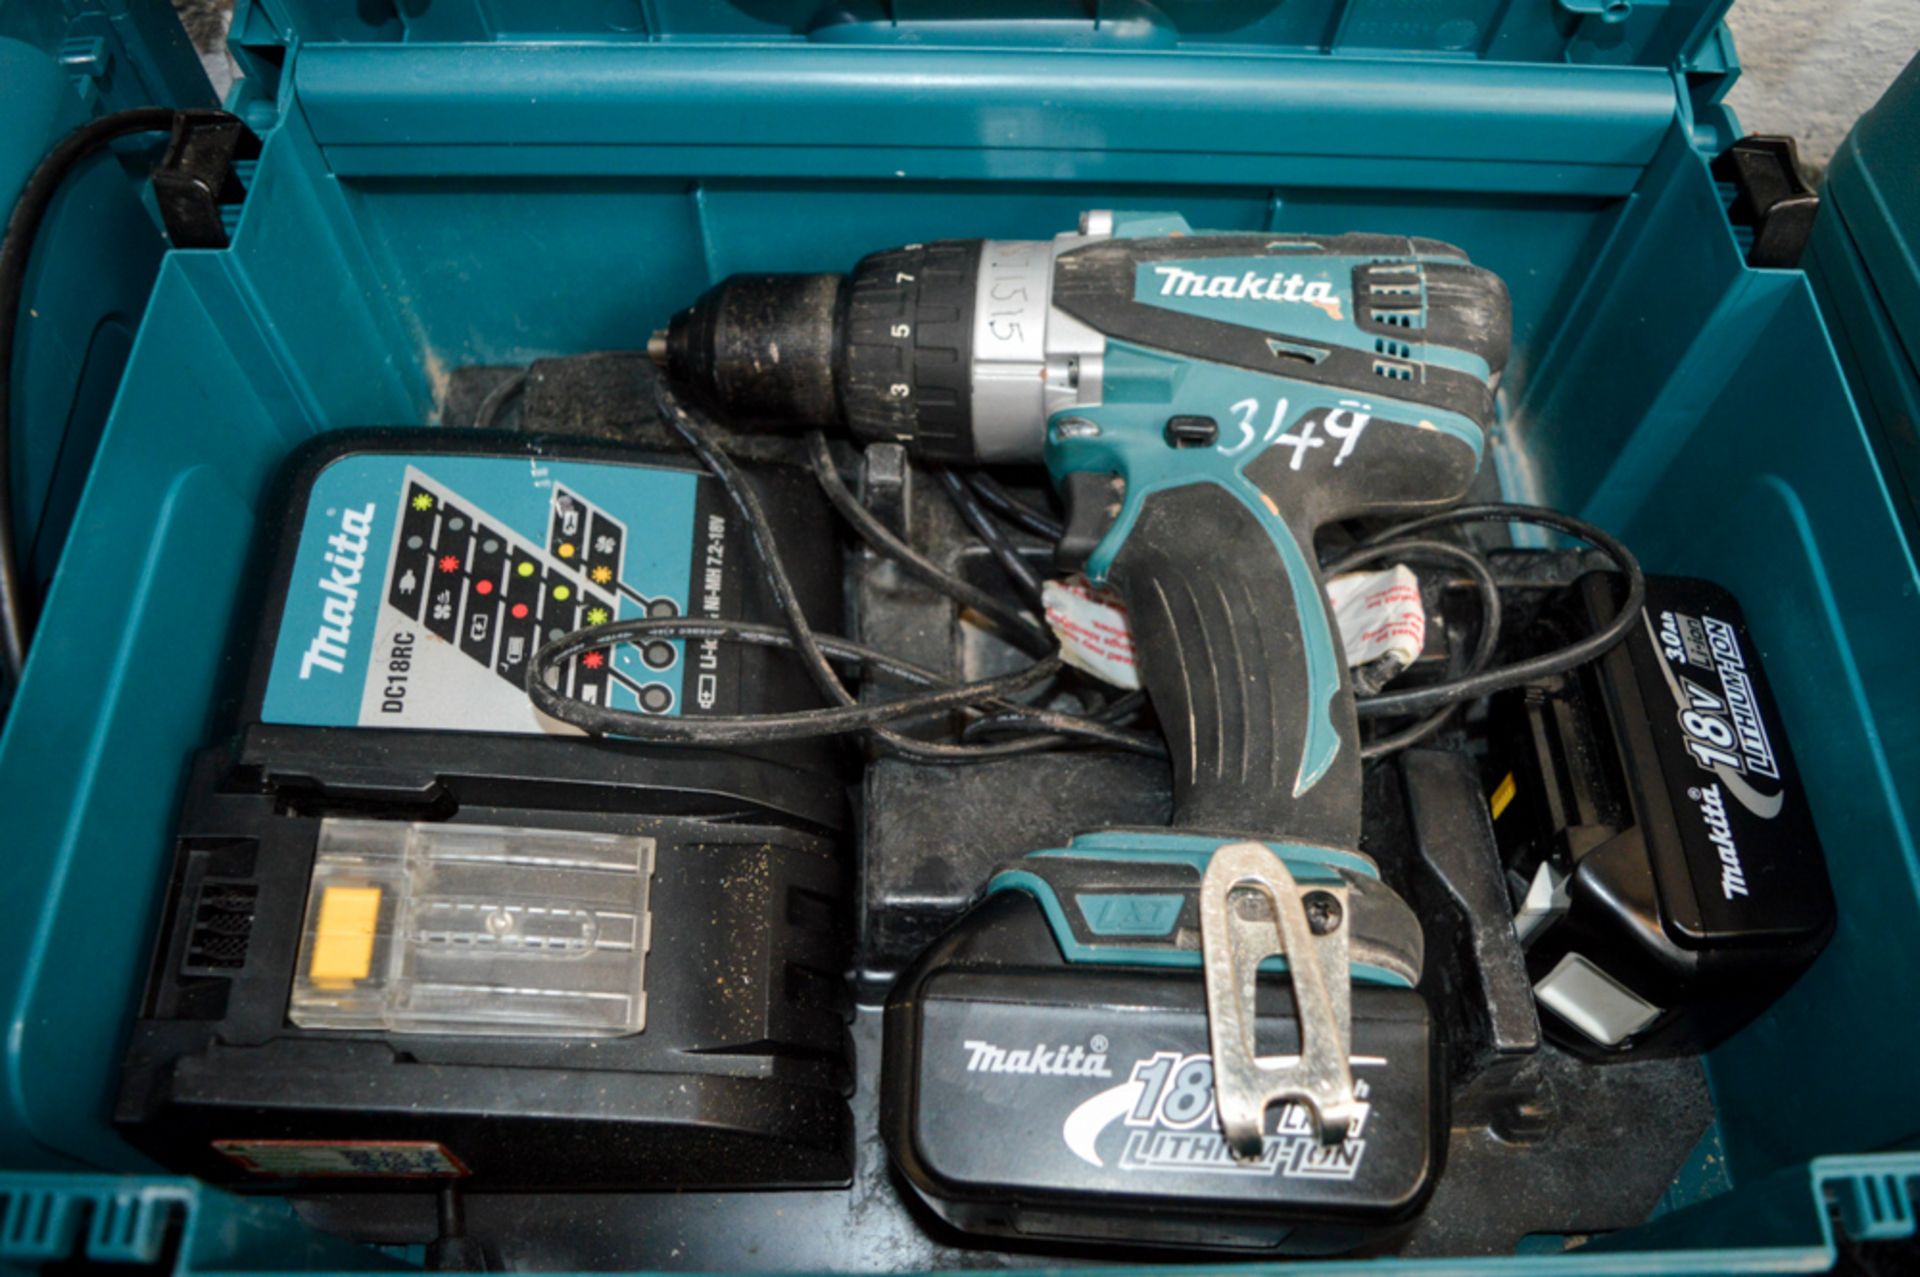 Makita 18v cordless power drill c/w 2 batteries, charger & carry case A671515